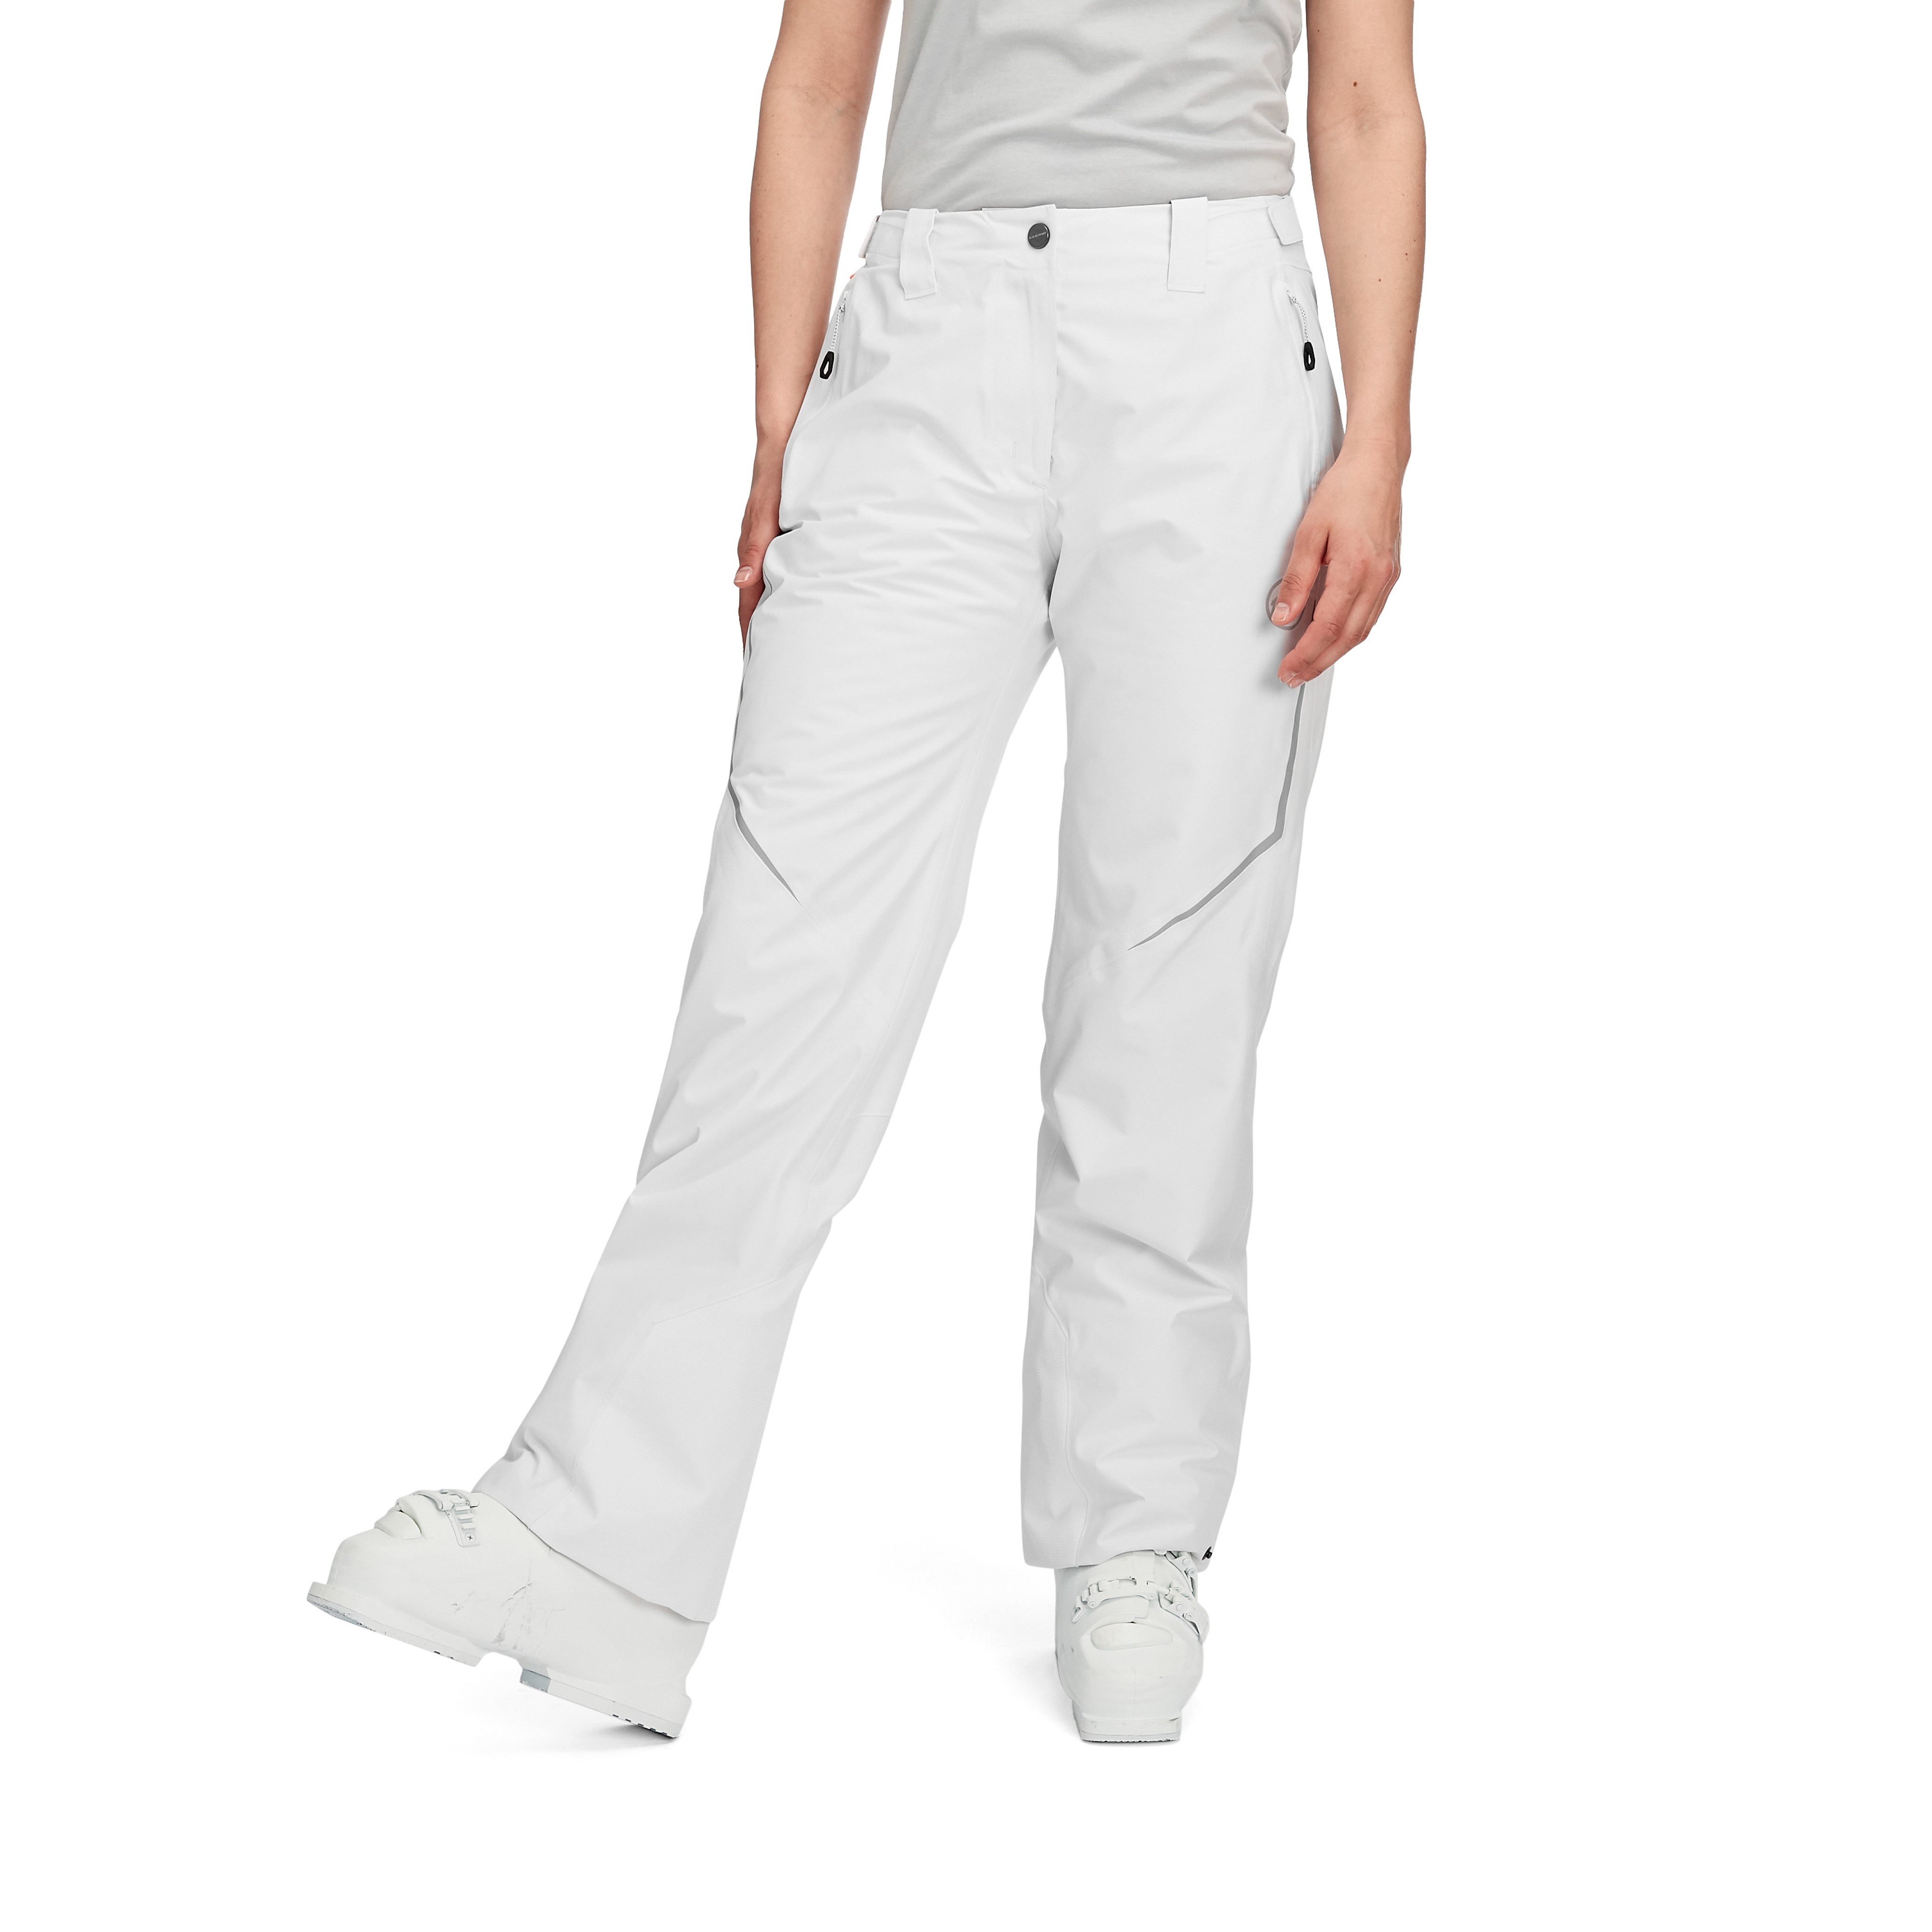 Matters HS Thermo Pants Women product image